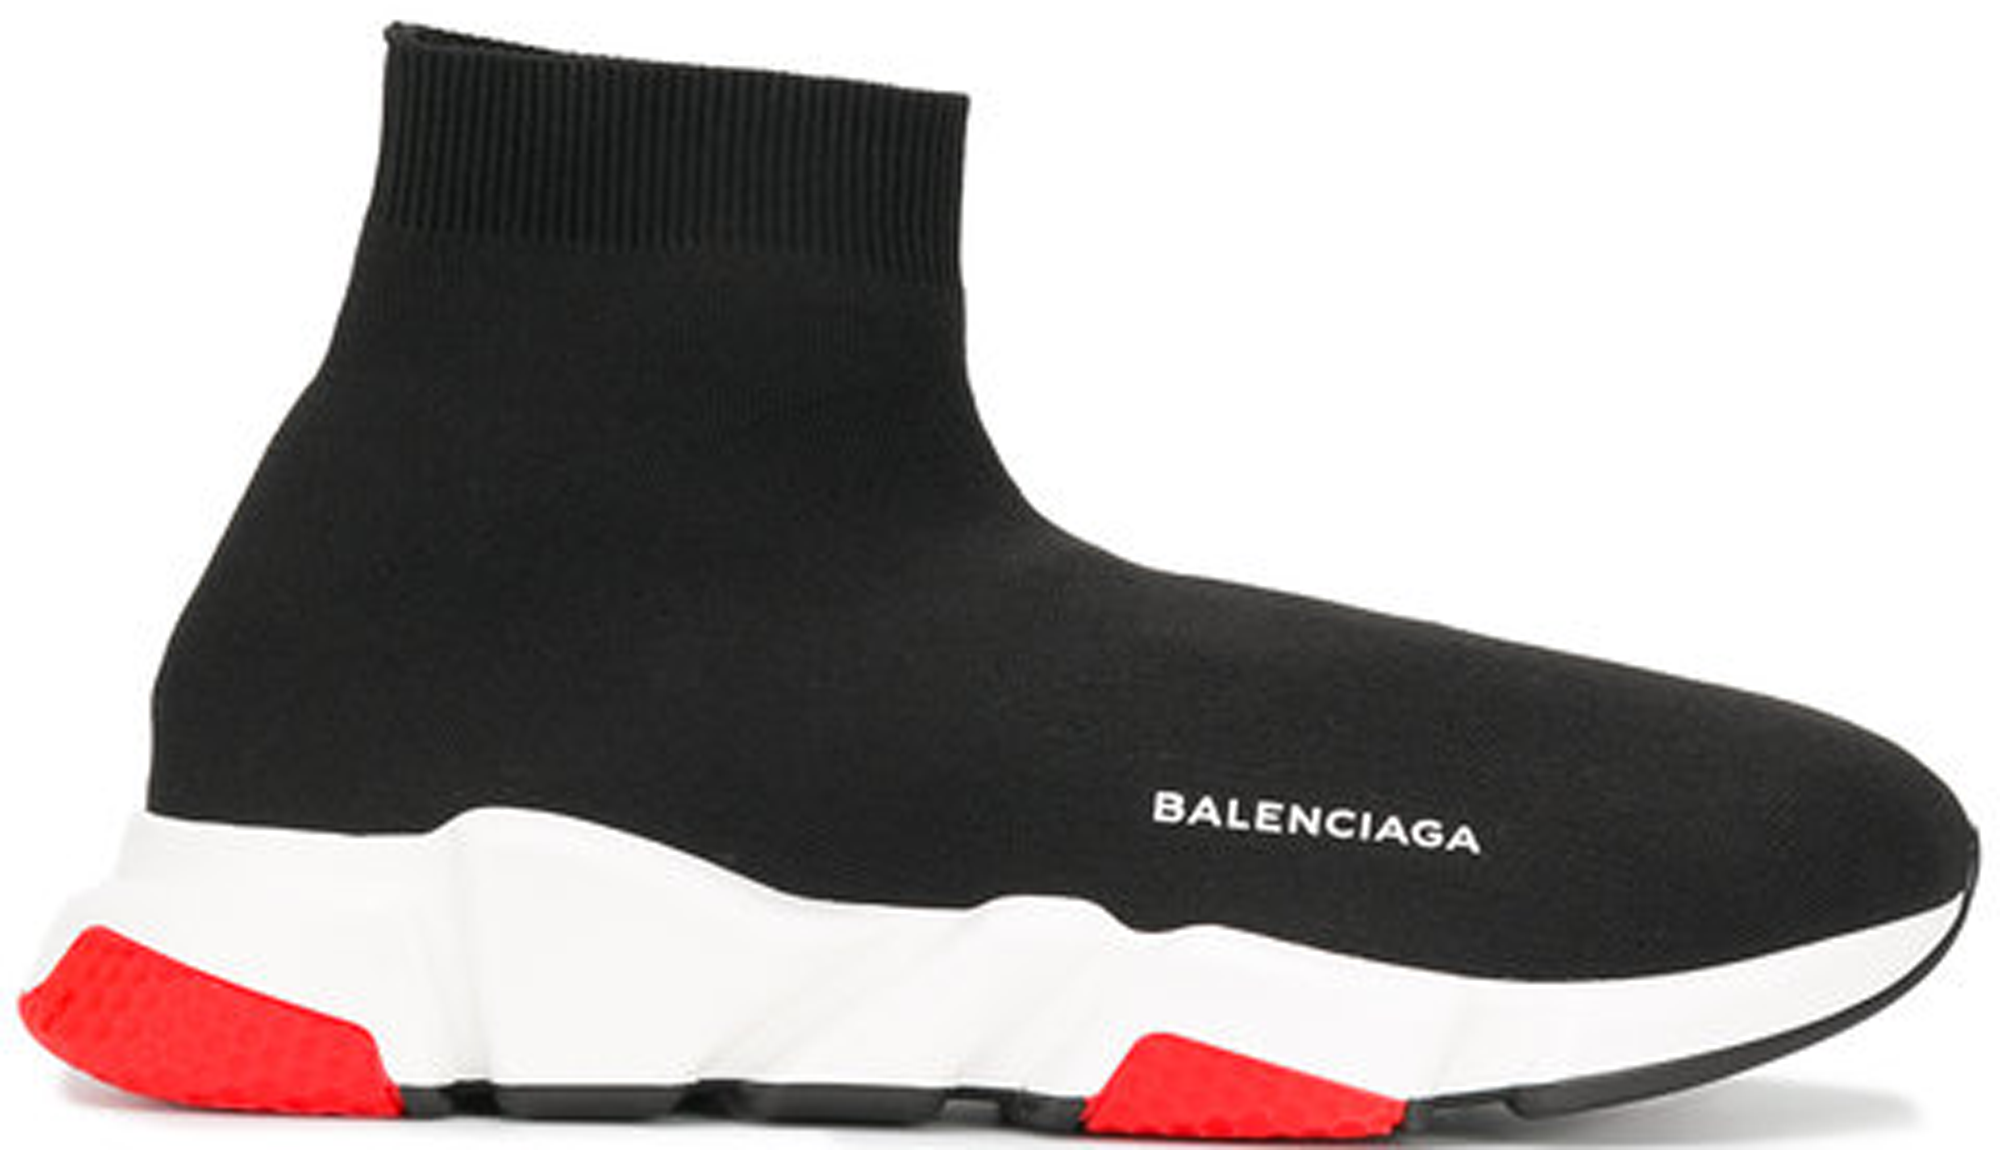 givenchy speed trainer